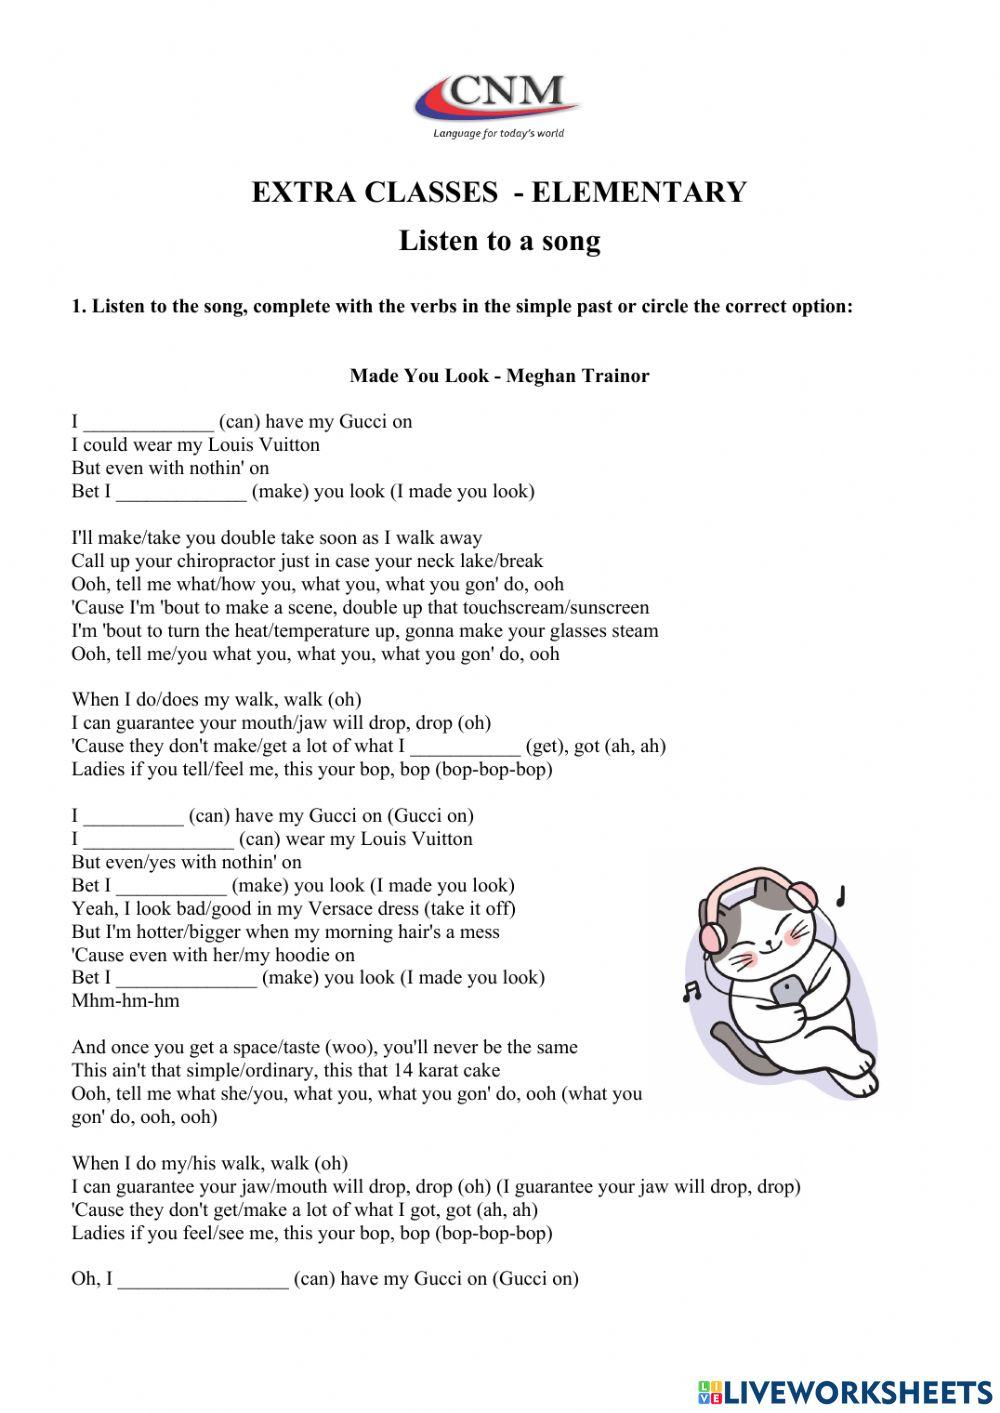 Listening to a song: Made you look worksheet